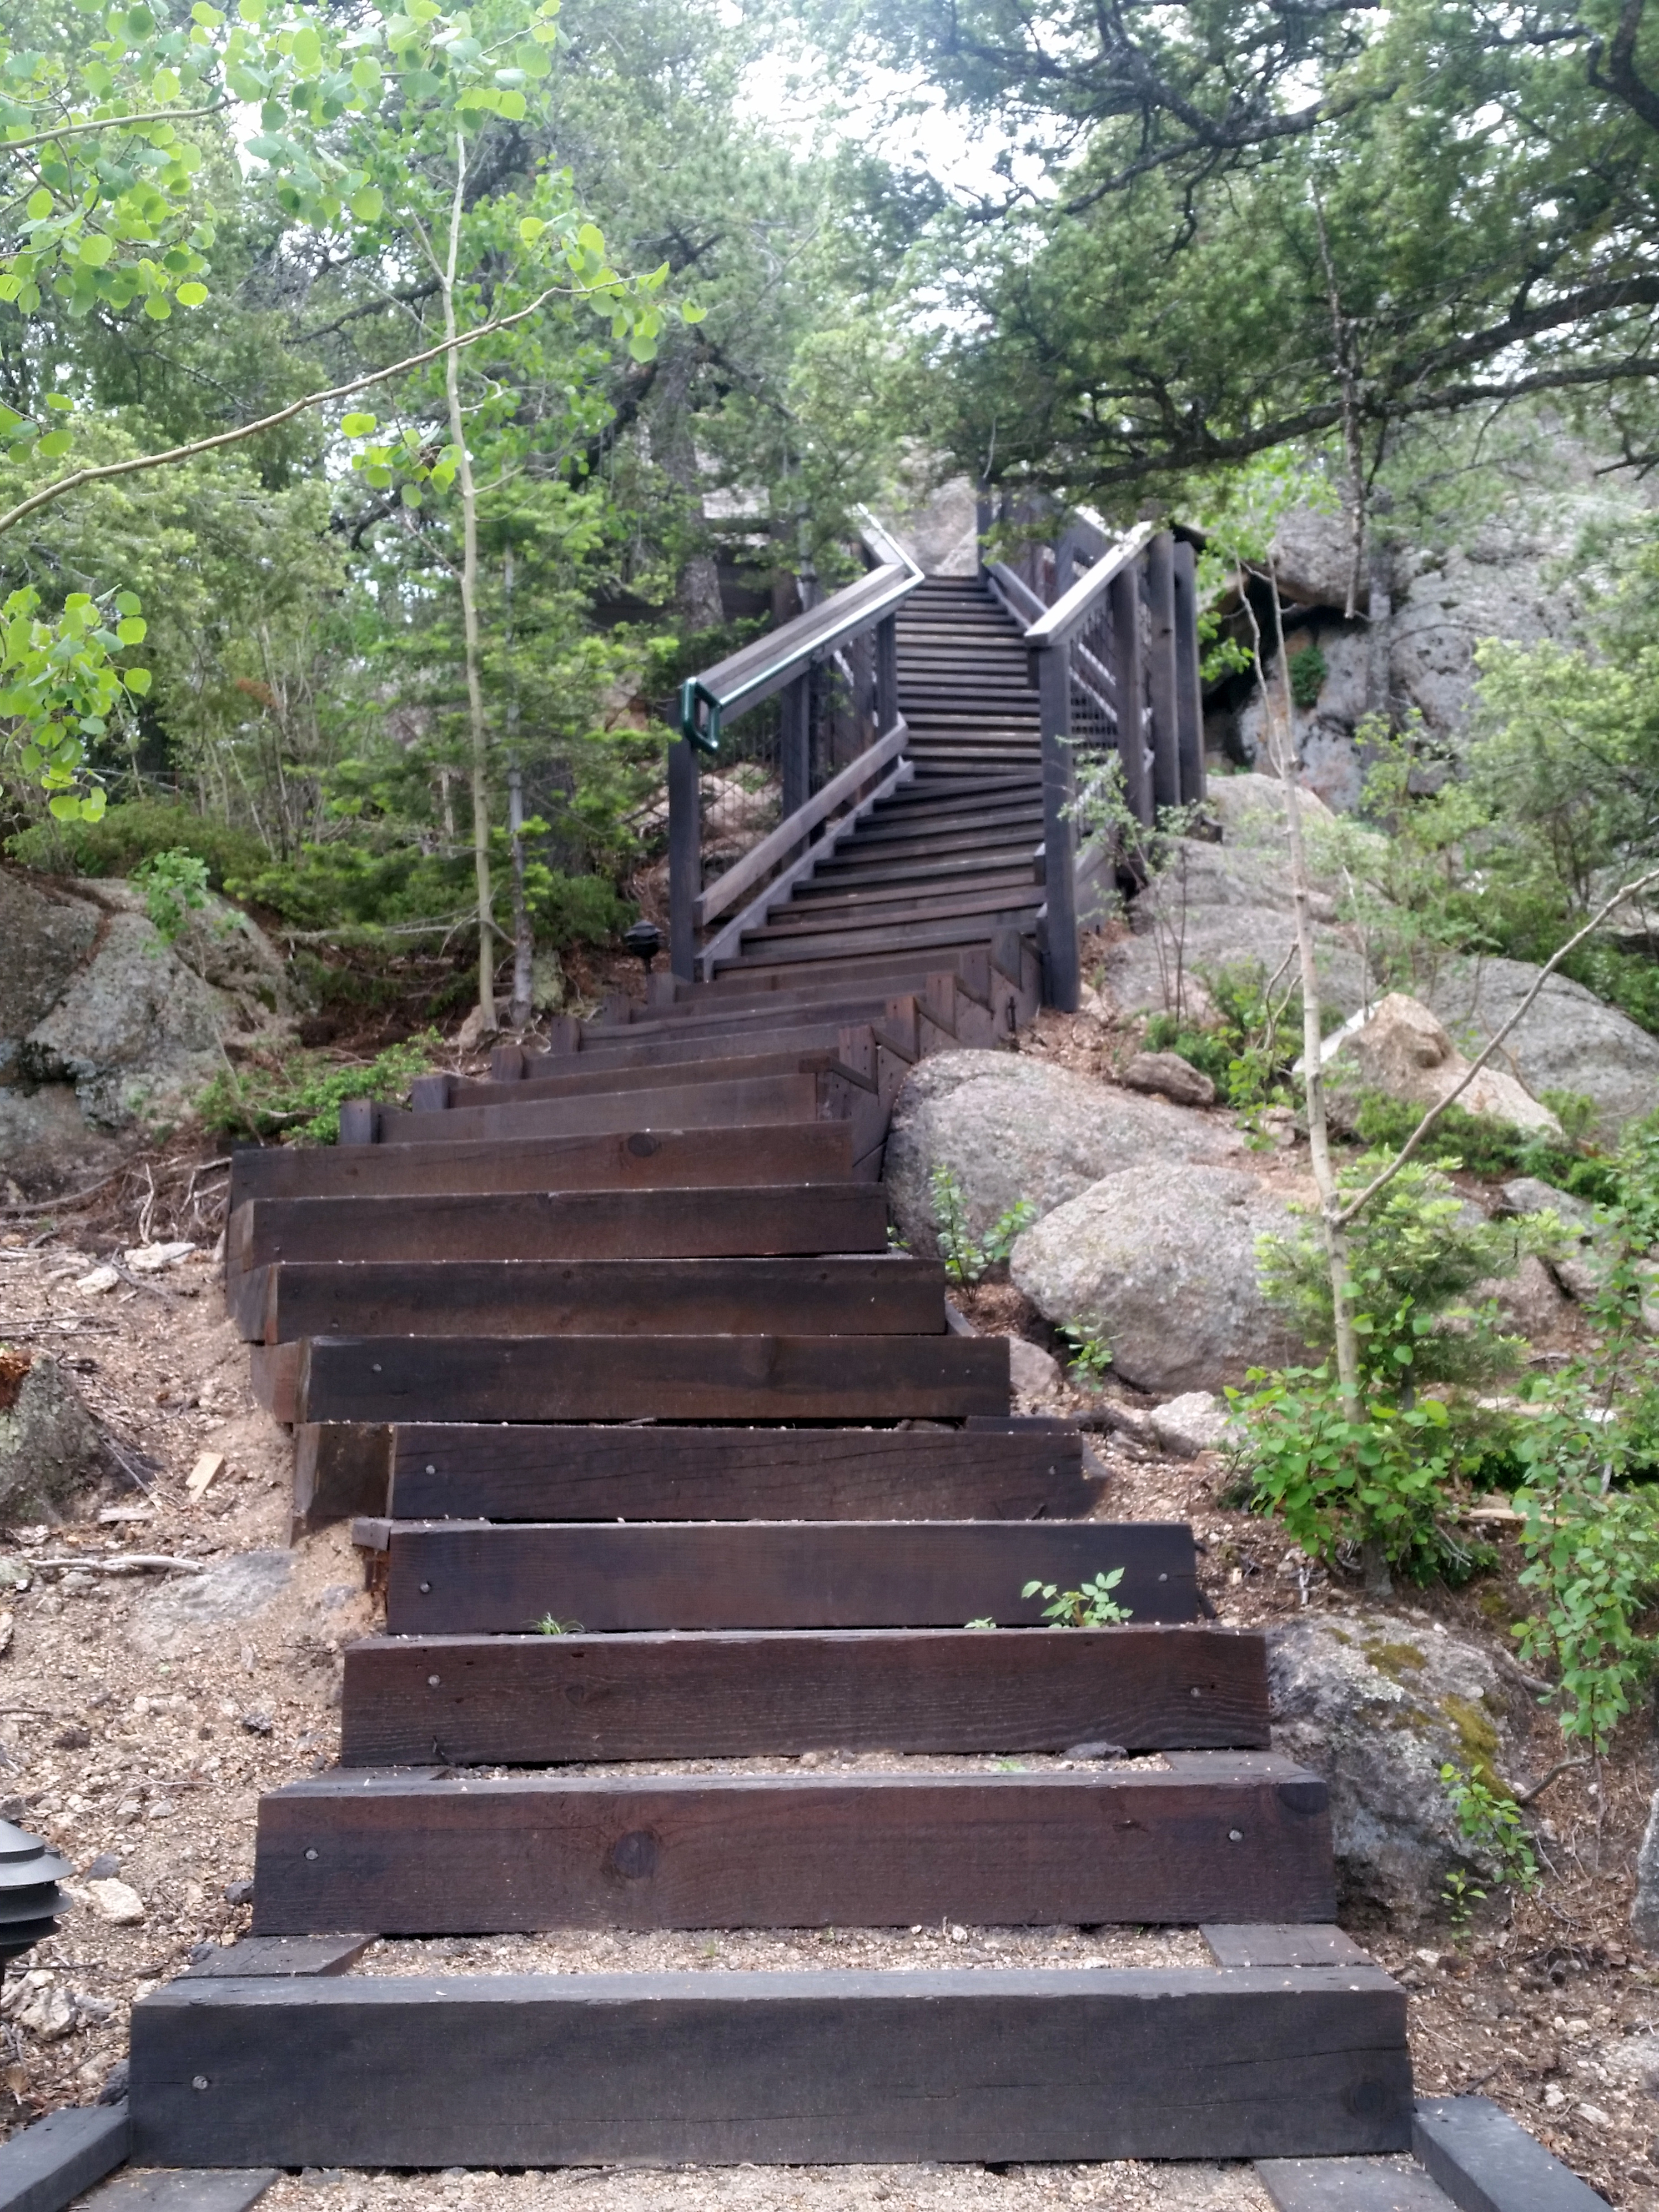 The steps keep coming at you en route to the Fire Tower Suite!